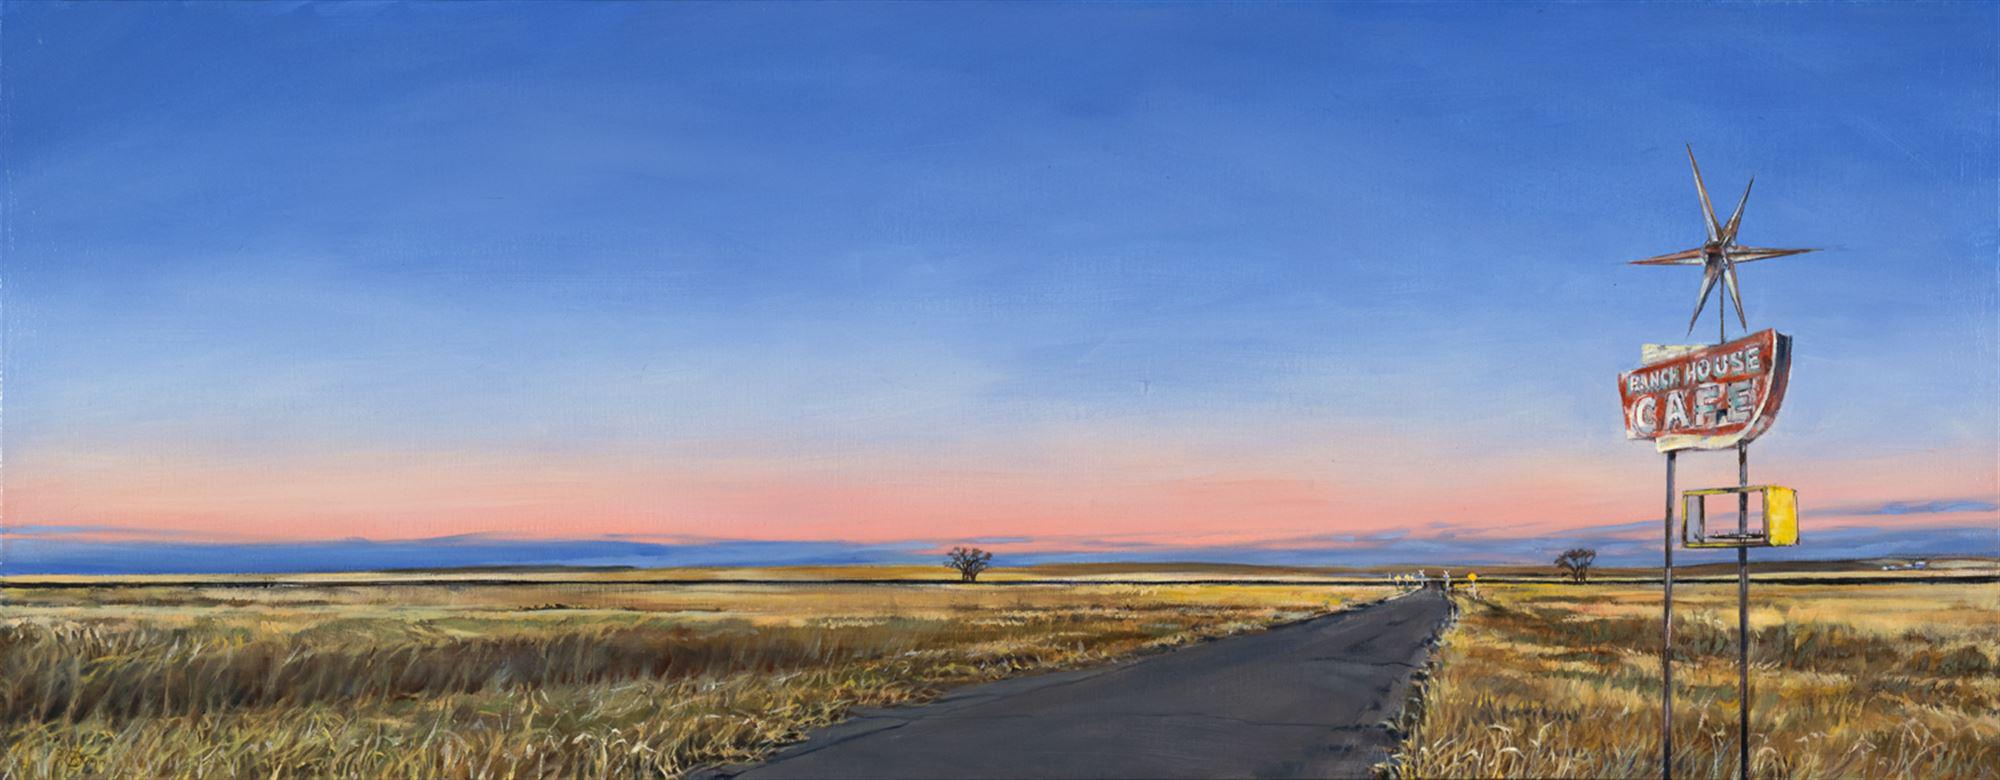 

											</b>

											<em>
												Lure of the West: Celebrating 50 Years of Gerald Peters Gallery  </em> 

											<h4>
												New York: April 29 - May 27, 2022      Santa Fe: June 24 - July 23, 2022											</h4>

		                																																													<i>Ranch House,</i>  
																																																					oil on linen, 
																																								18 x 45 7/8 inches 
																								
		                				